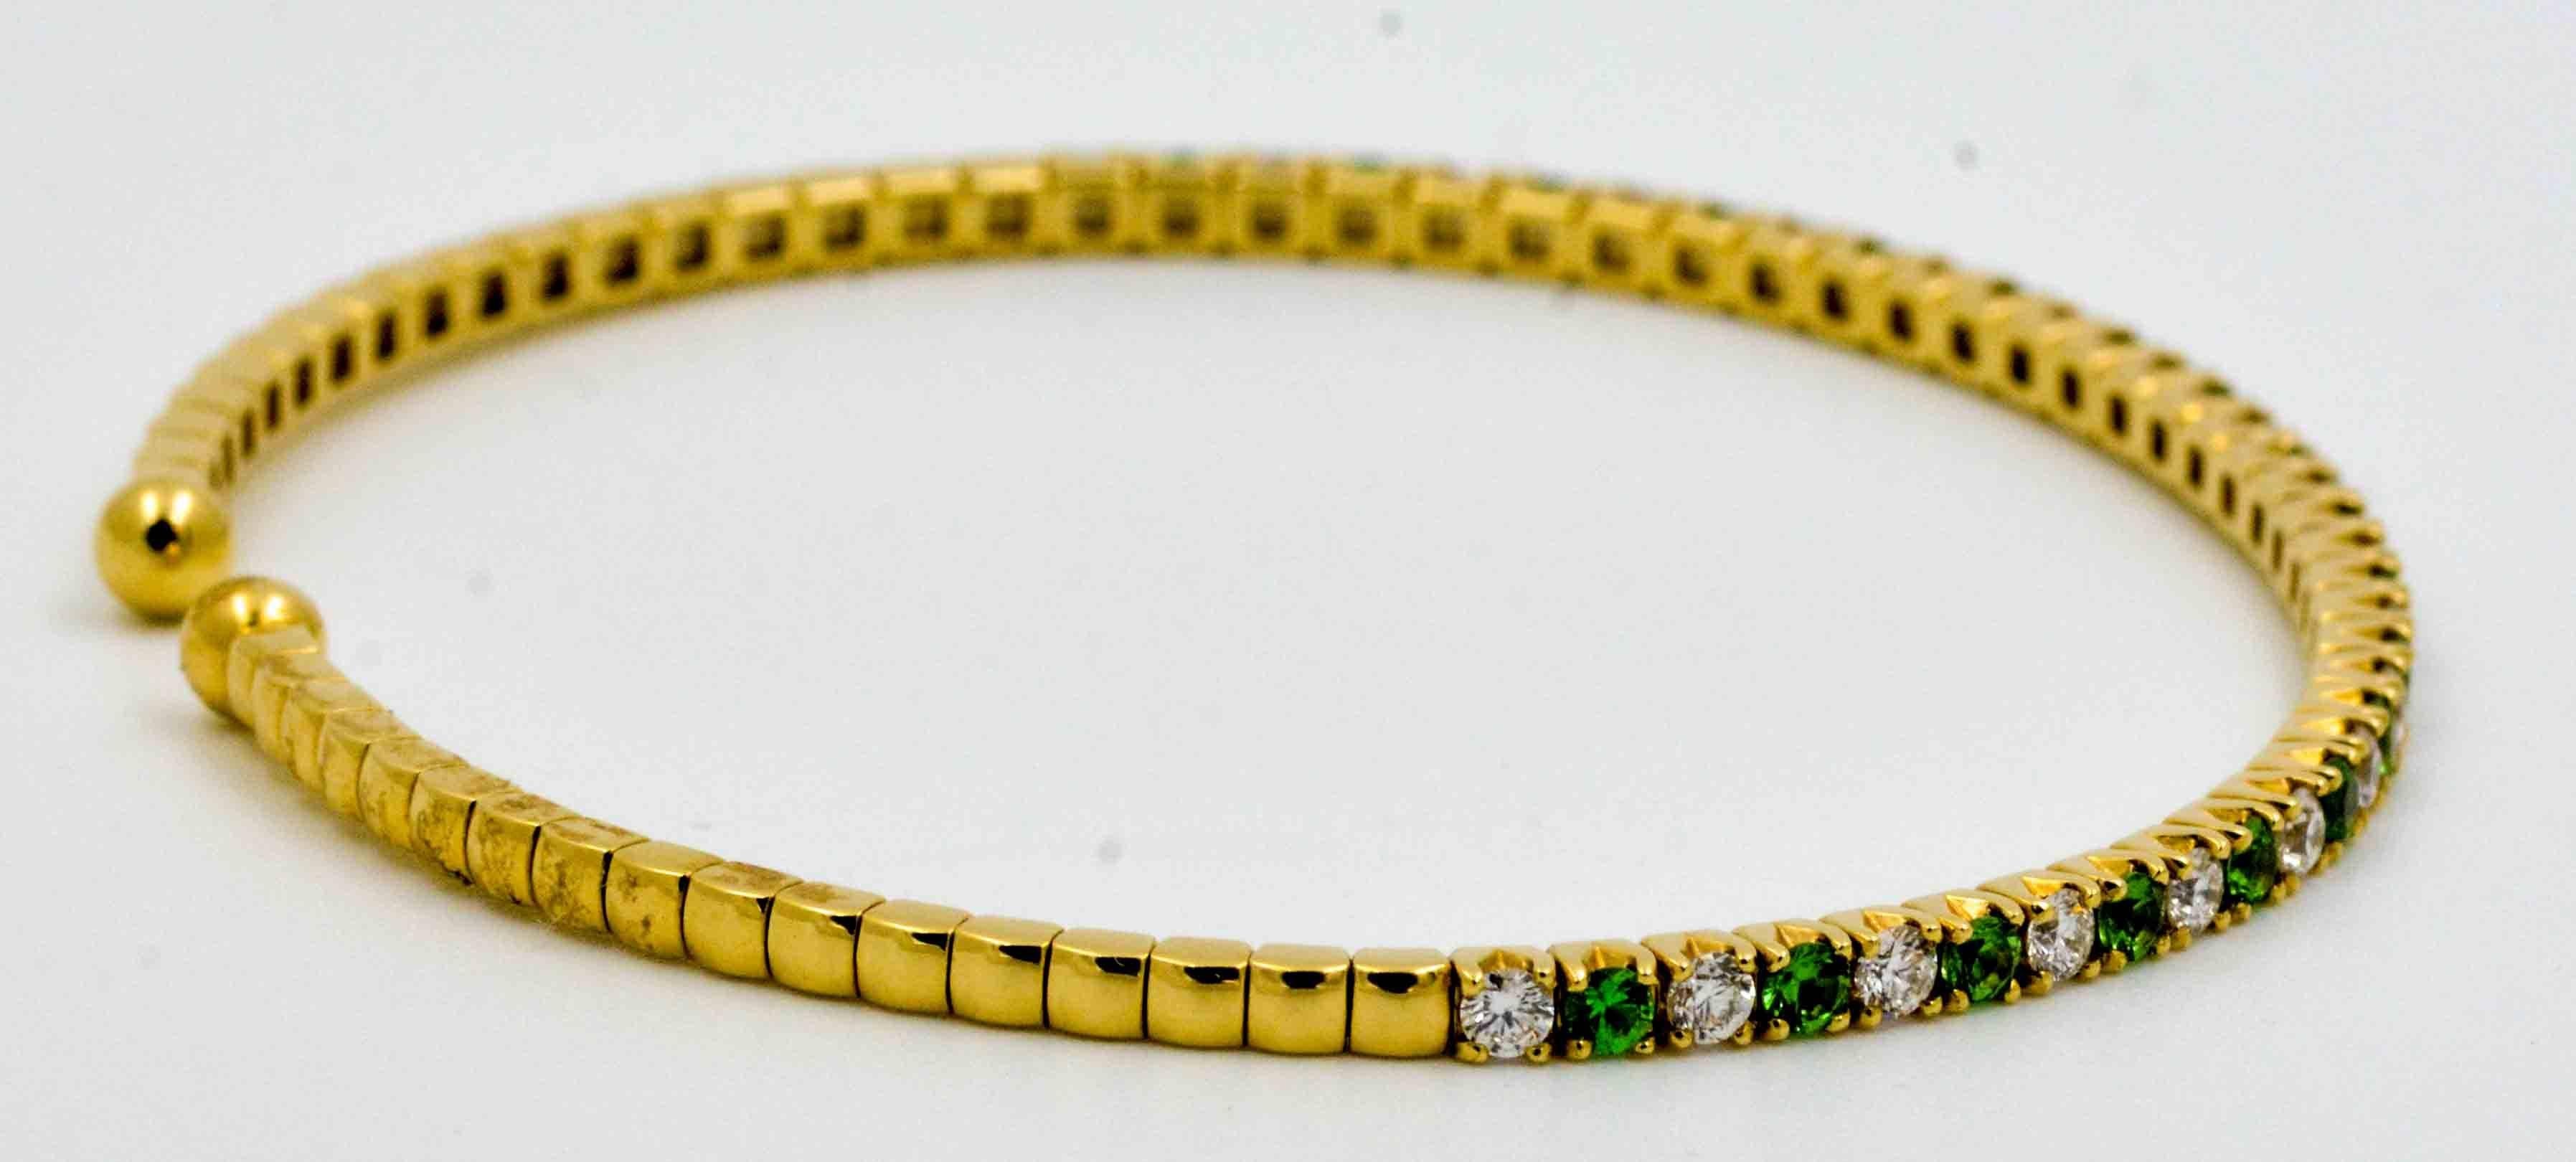 Feminine, functional and fun, this delicate 18kt yellow gold bracelet is set with beautifully contrasting green Tsavorite garnets and graceful white diamonds.  The diamonds have combined weight of 0.60 carats with G-H color and VS clarity.  The